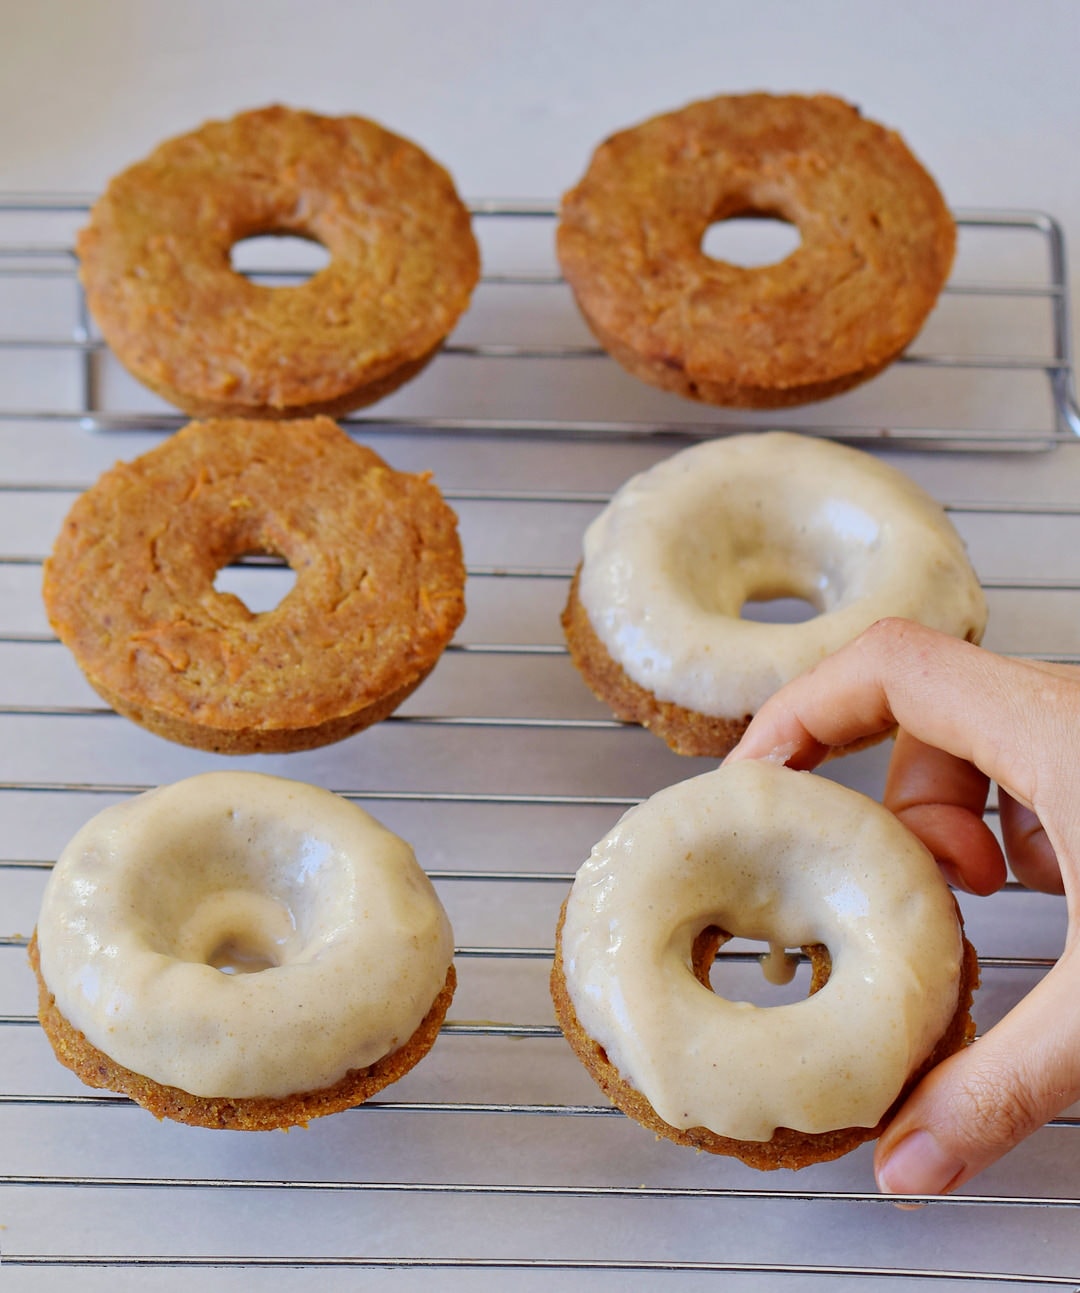 vegan carrot cake donuts with gingerbread flavor and frosting on a wire rack